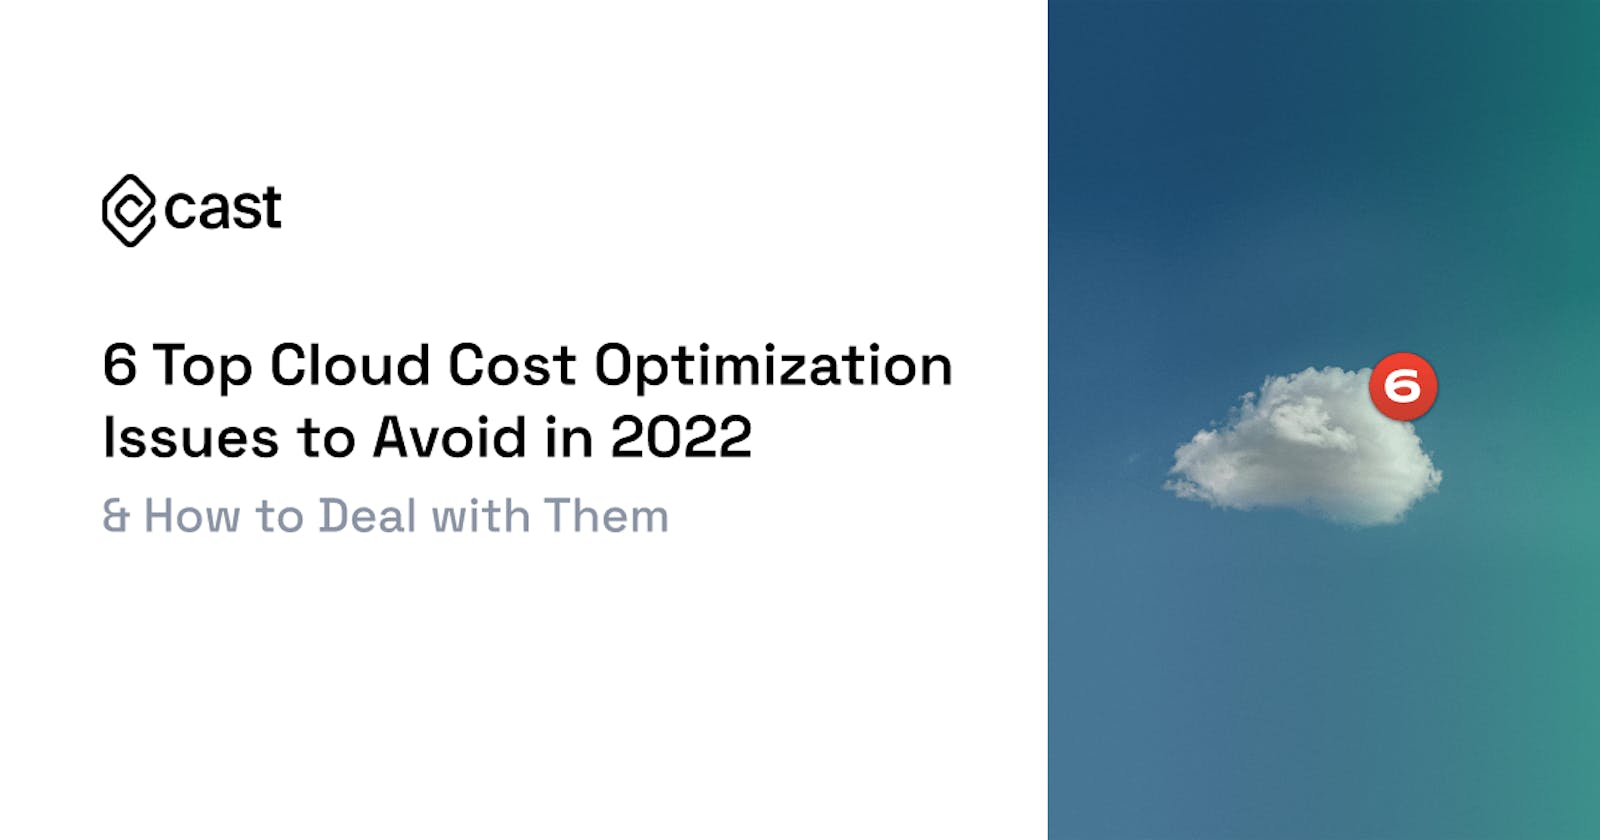 6 Top Cloud Cost Optimization Issues to Solve in 2022